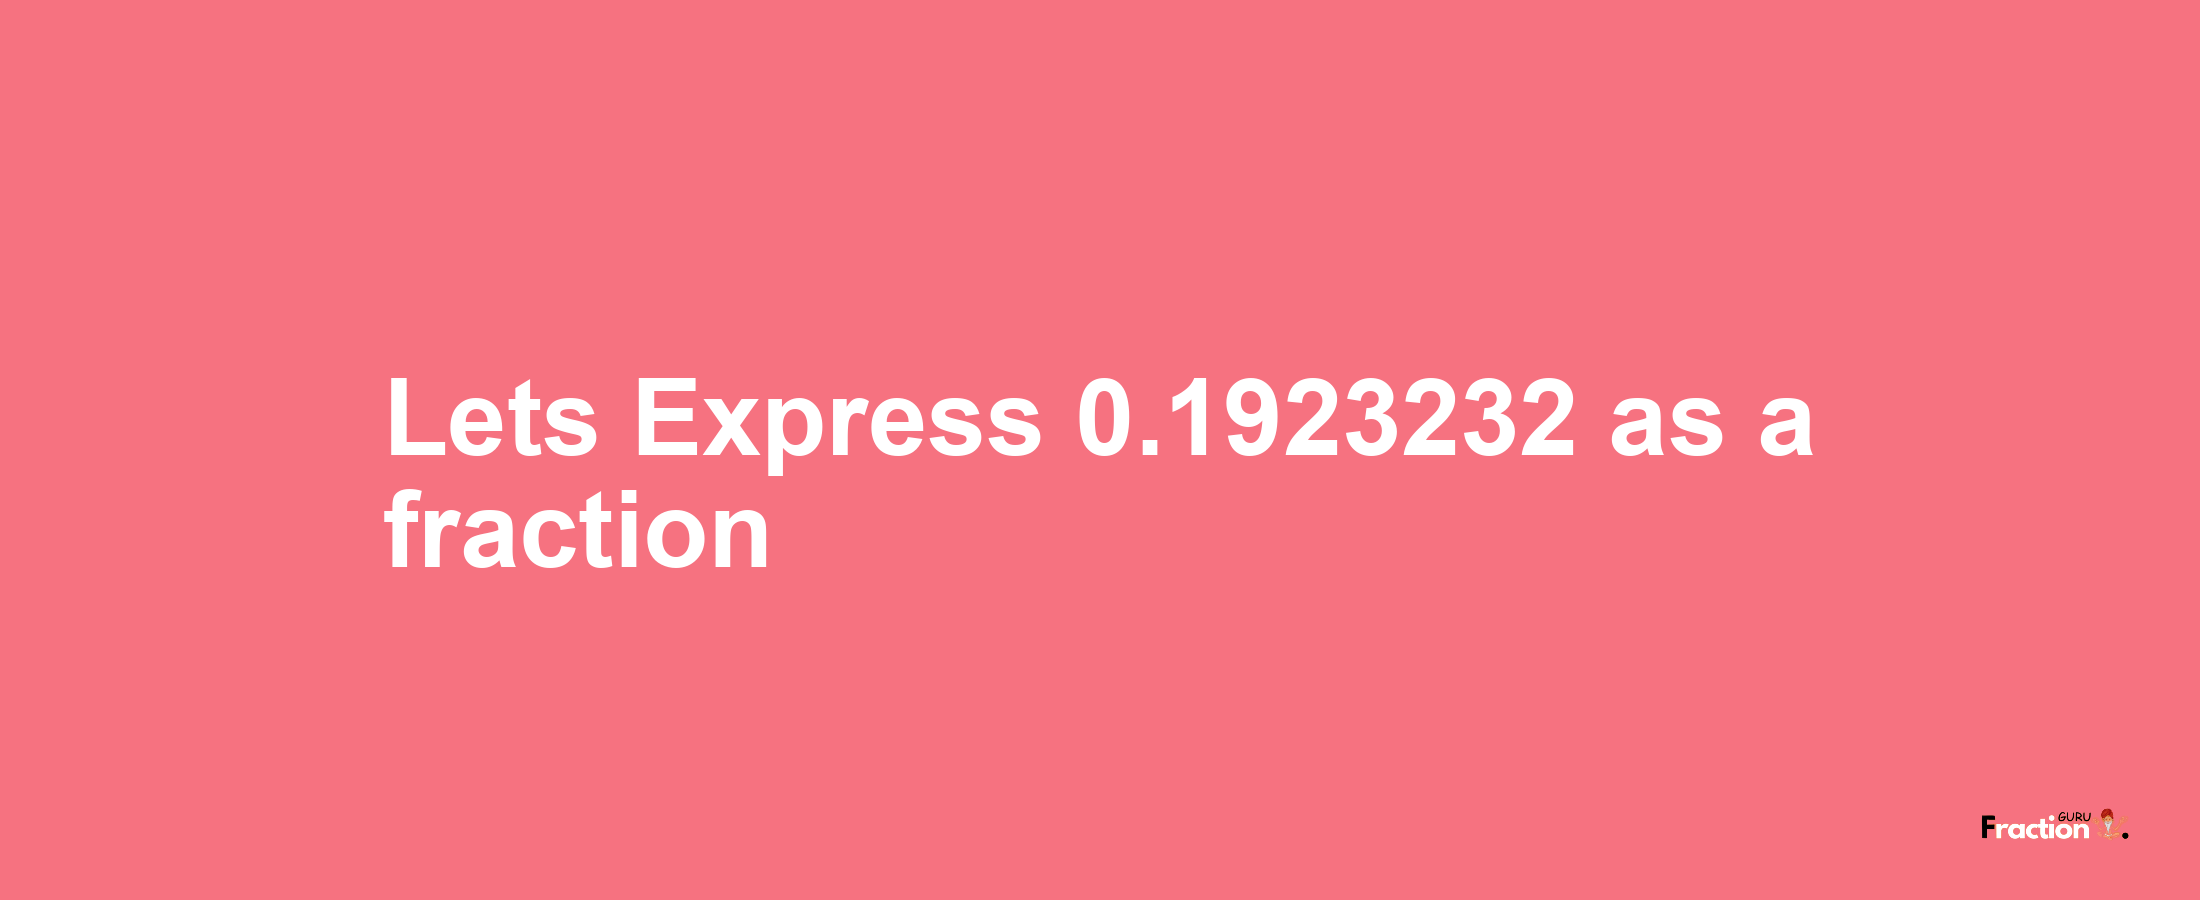 Lets Express 0.1923232 as afraction